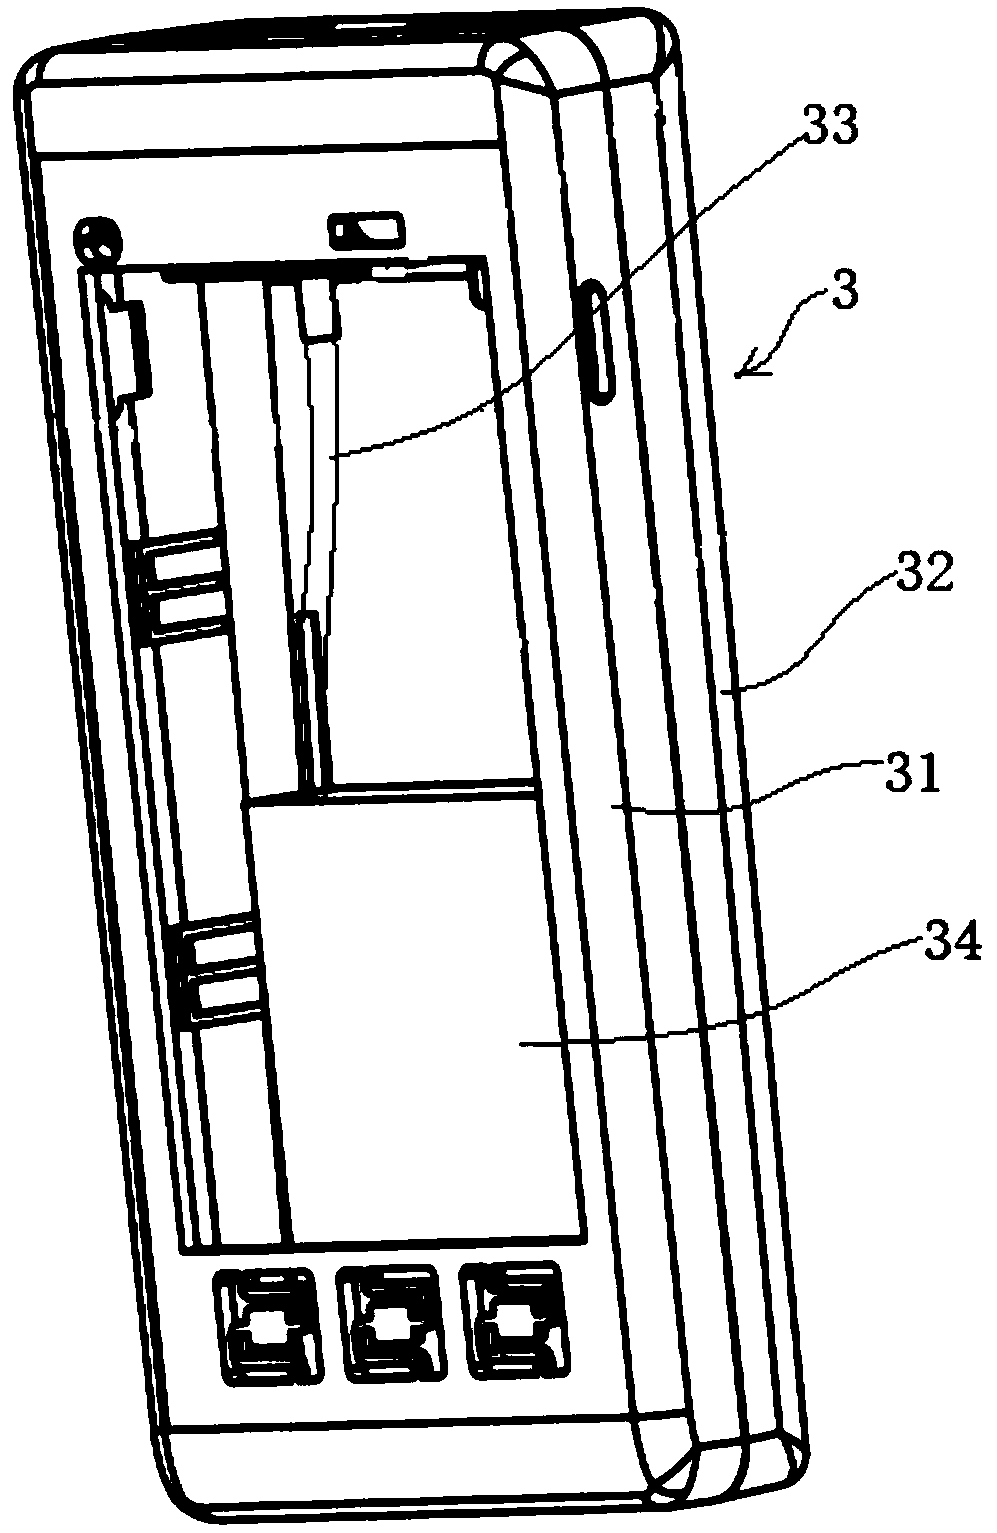 Side-stream type end-tidal carbon dioxide detecting device